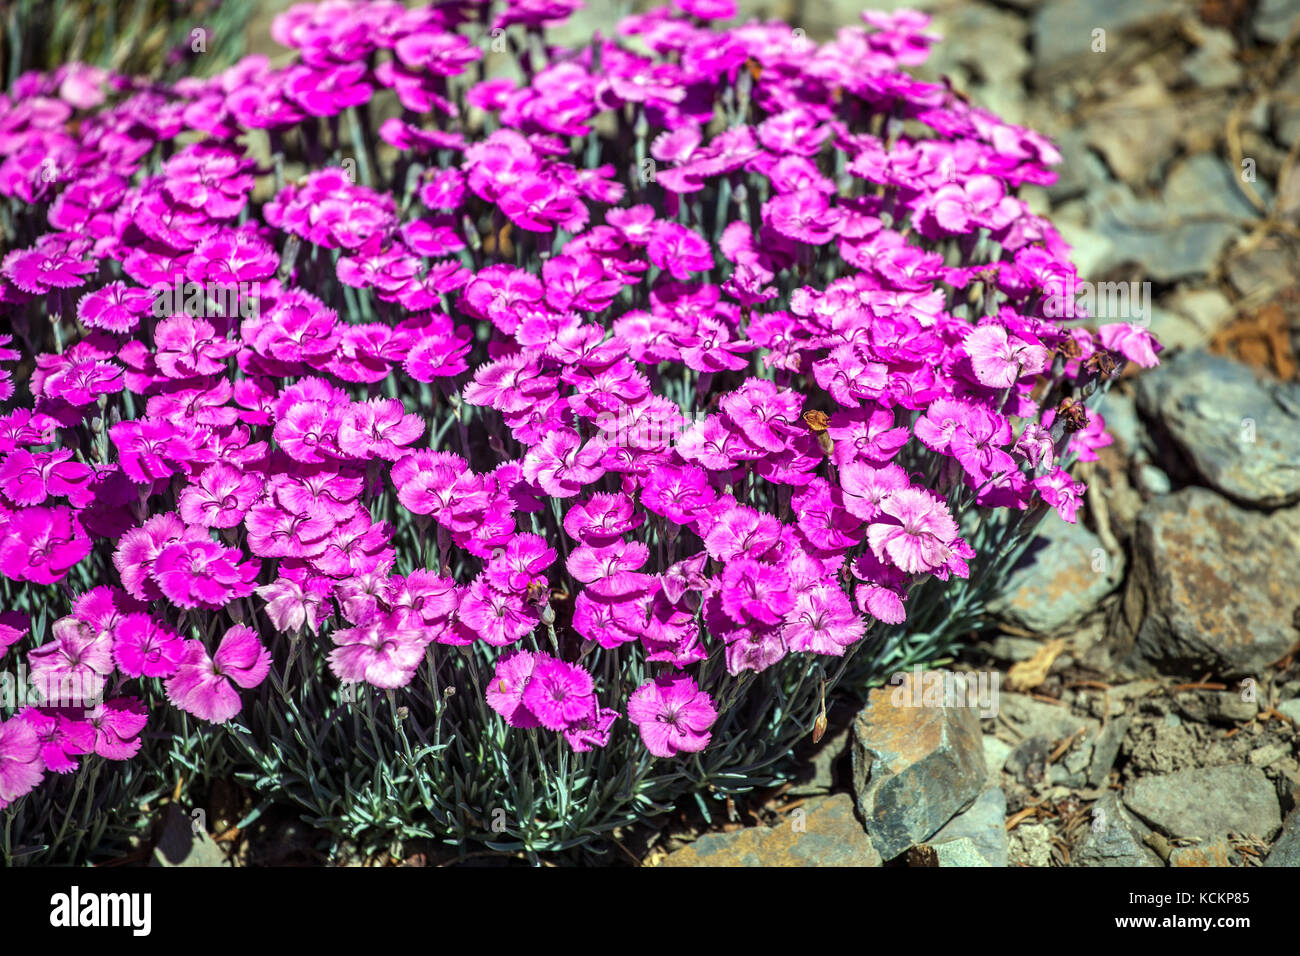 Dianthus 'Whatfield Magenta' Purple Rocky Garden Flowers Blooming Deep Pink Blooms Alpine Plant Growing Dry Ground Cover place Dianthus Tuft Blooms Banque D'Images